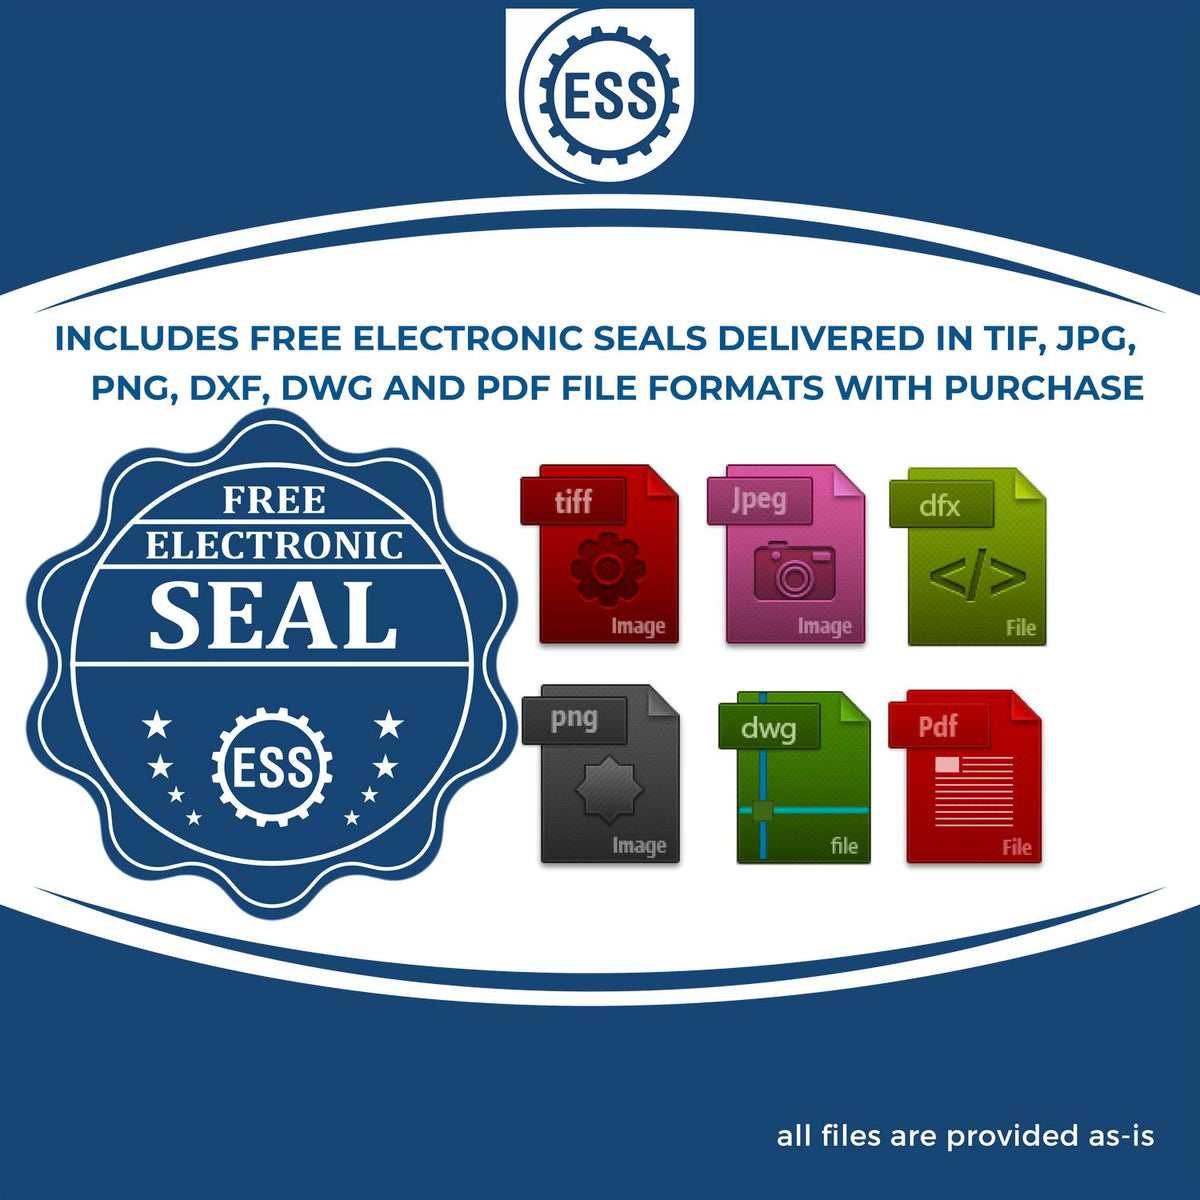 An infographic for the free electronic seal for the Heavy Duty Cast Iron Arizona Land Surveyor Seal Embosser illustrating the different file type icons such as DXF, DWG, TIF, JPG and PNG.